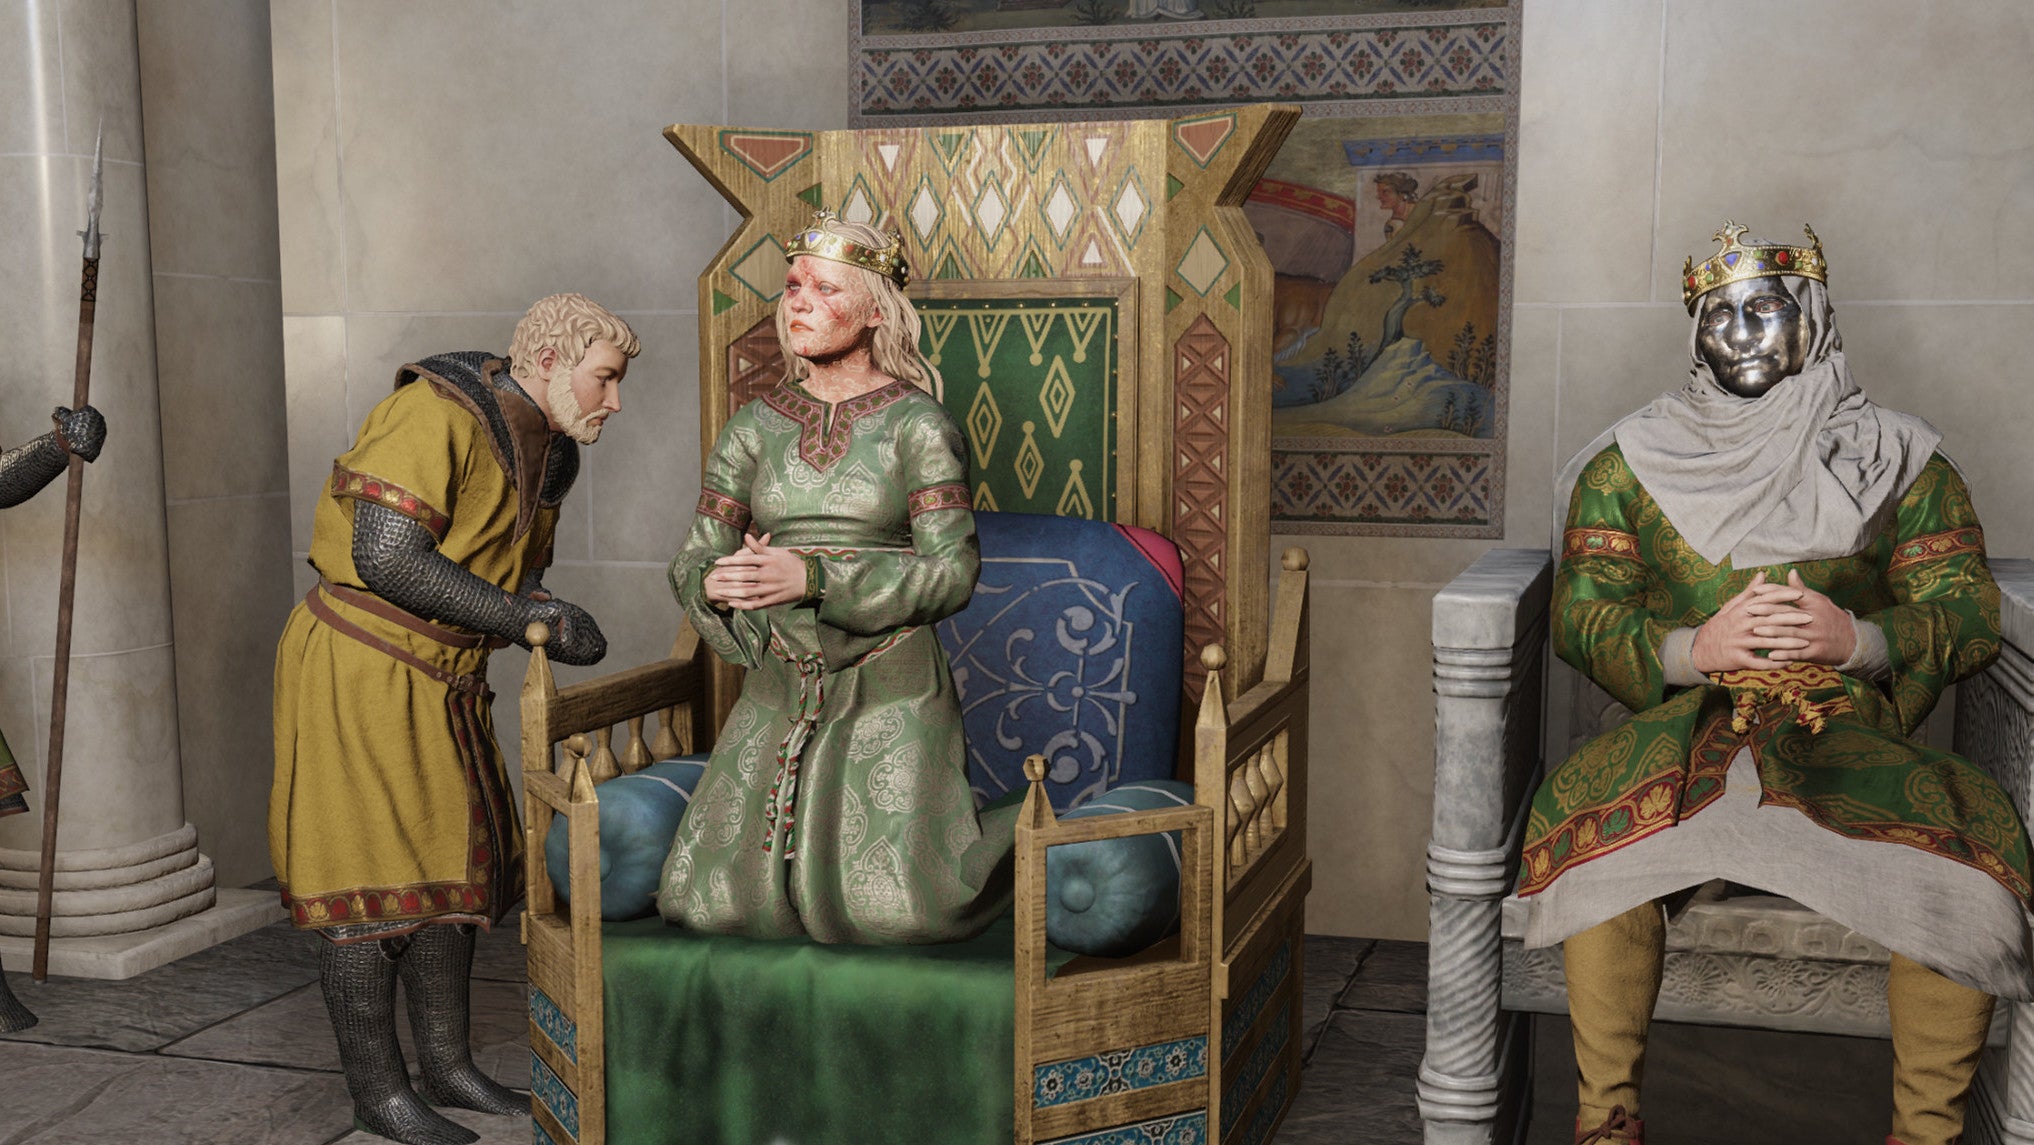 A queen consulting in a Crusader Kings 3: Royal Court screenshot.